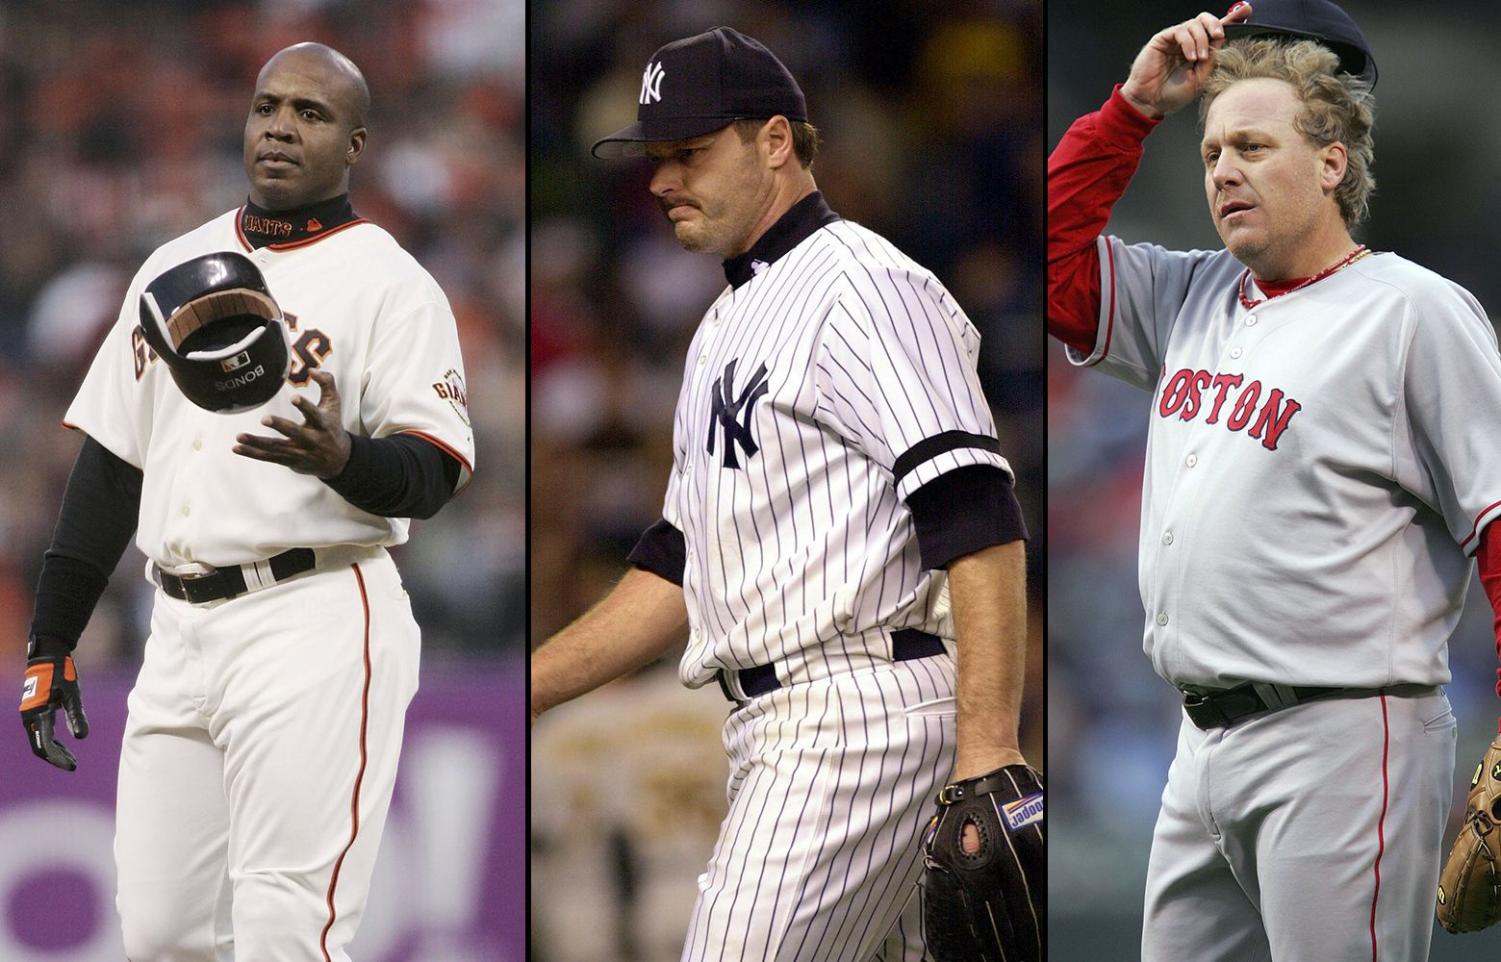 There will be no inductees in the Baseball Hall of Fame class of 2021